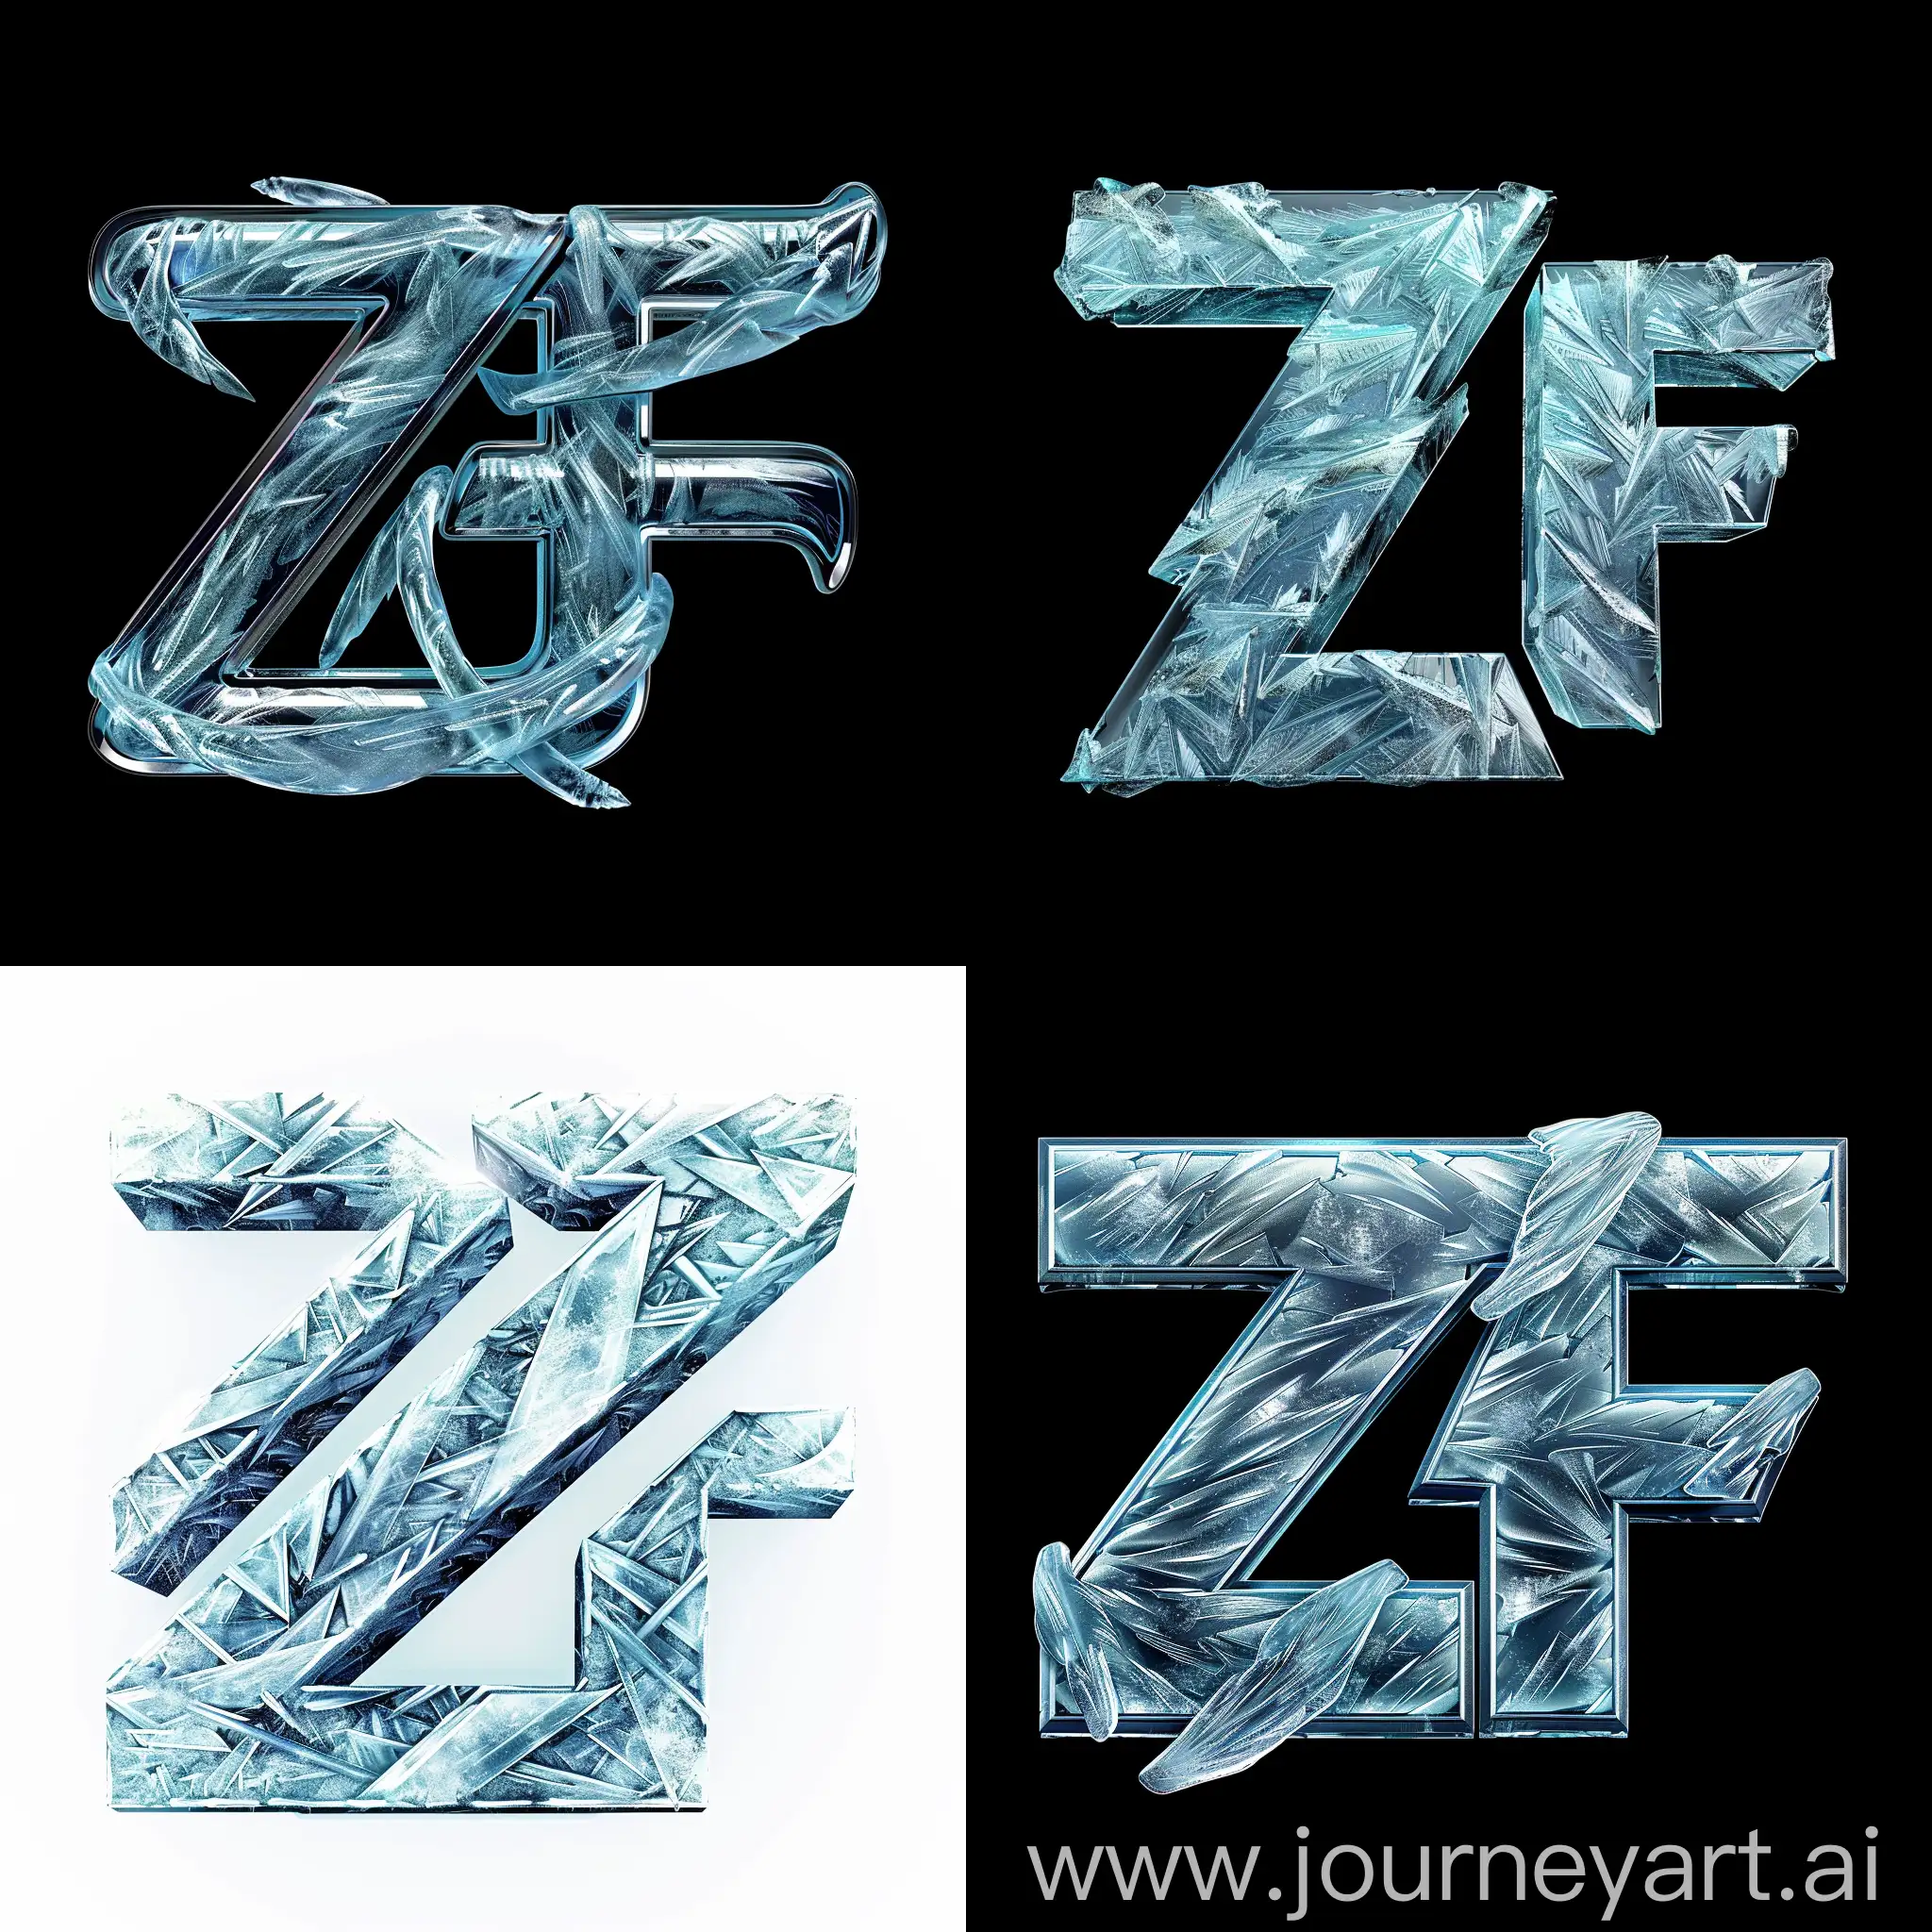 The letters "Z" and "F" intertwined in a cold frozen icy futuristic logo